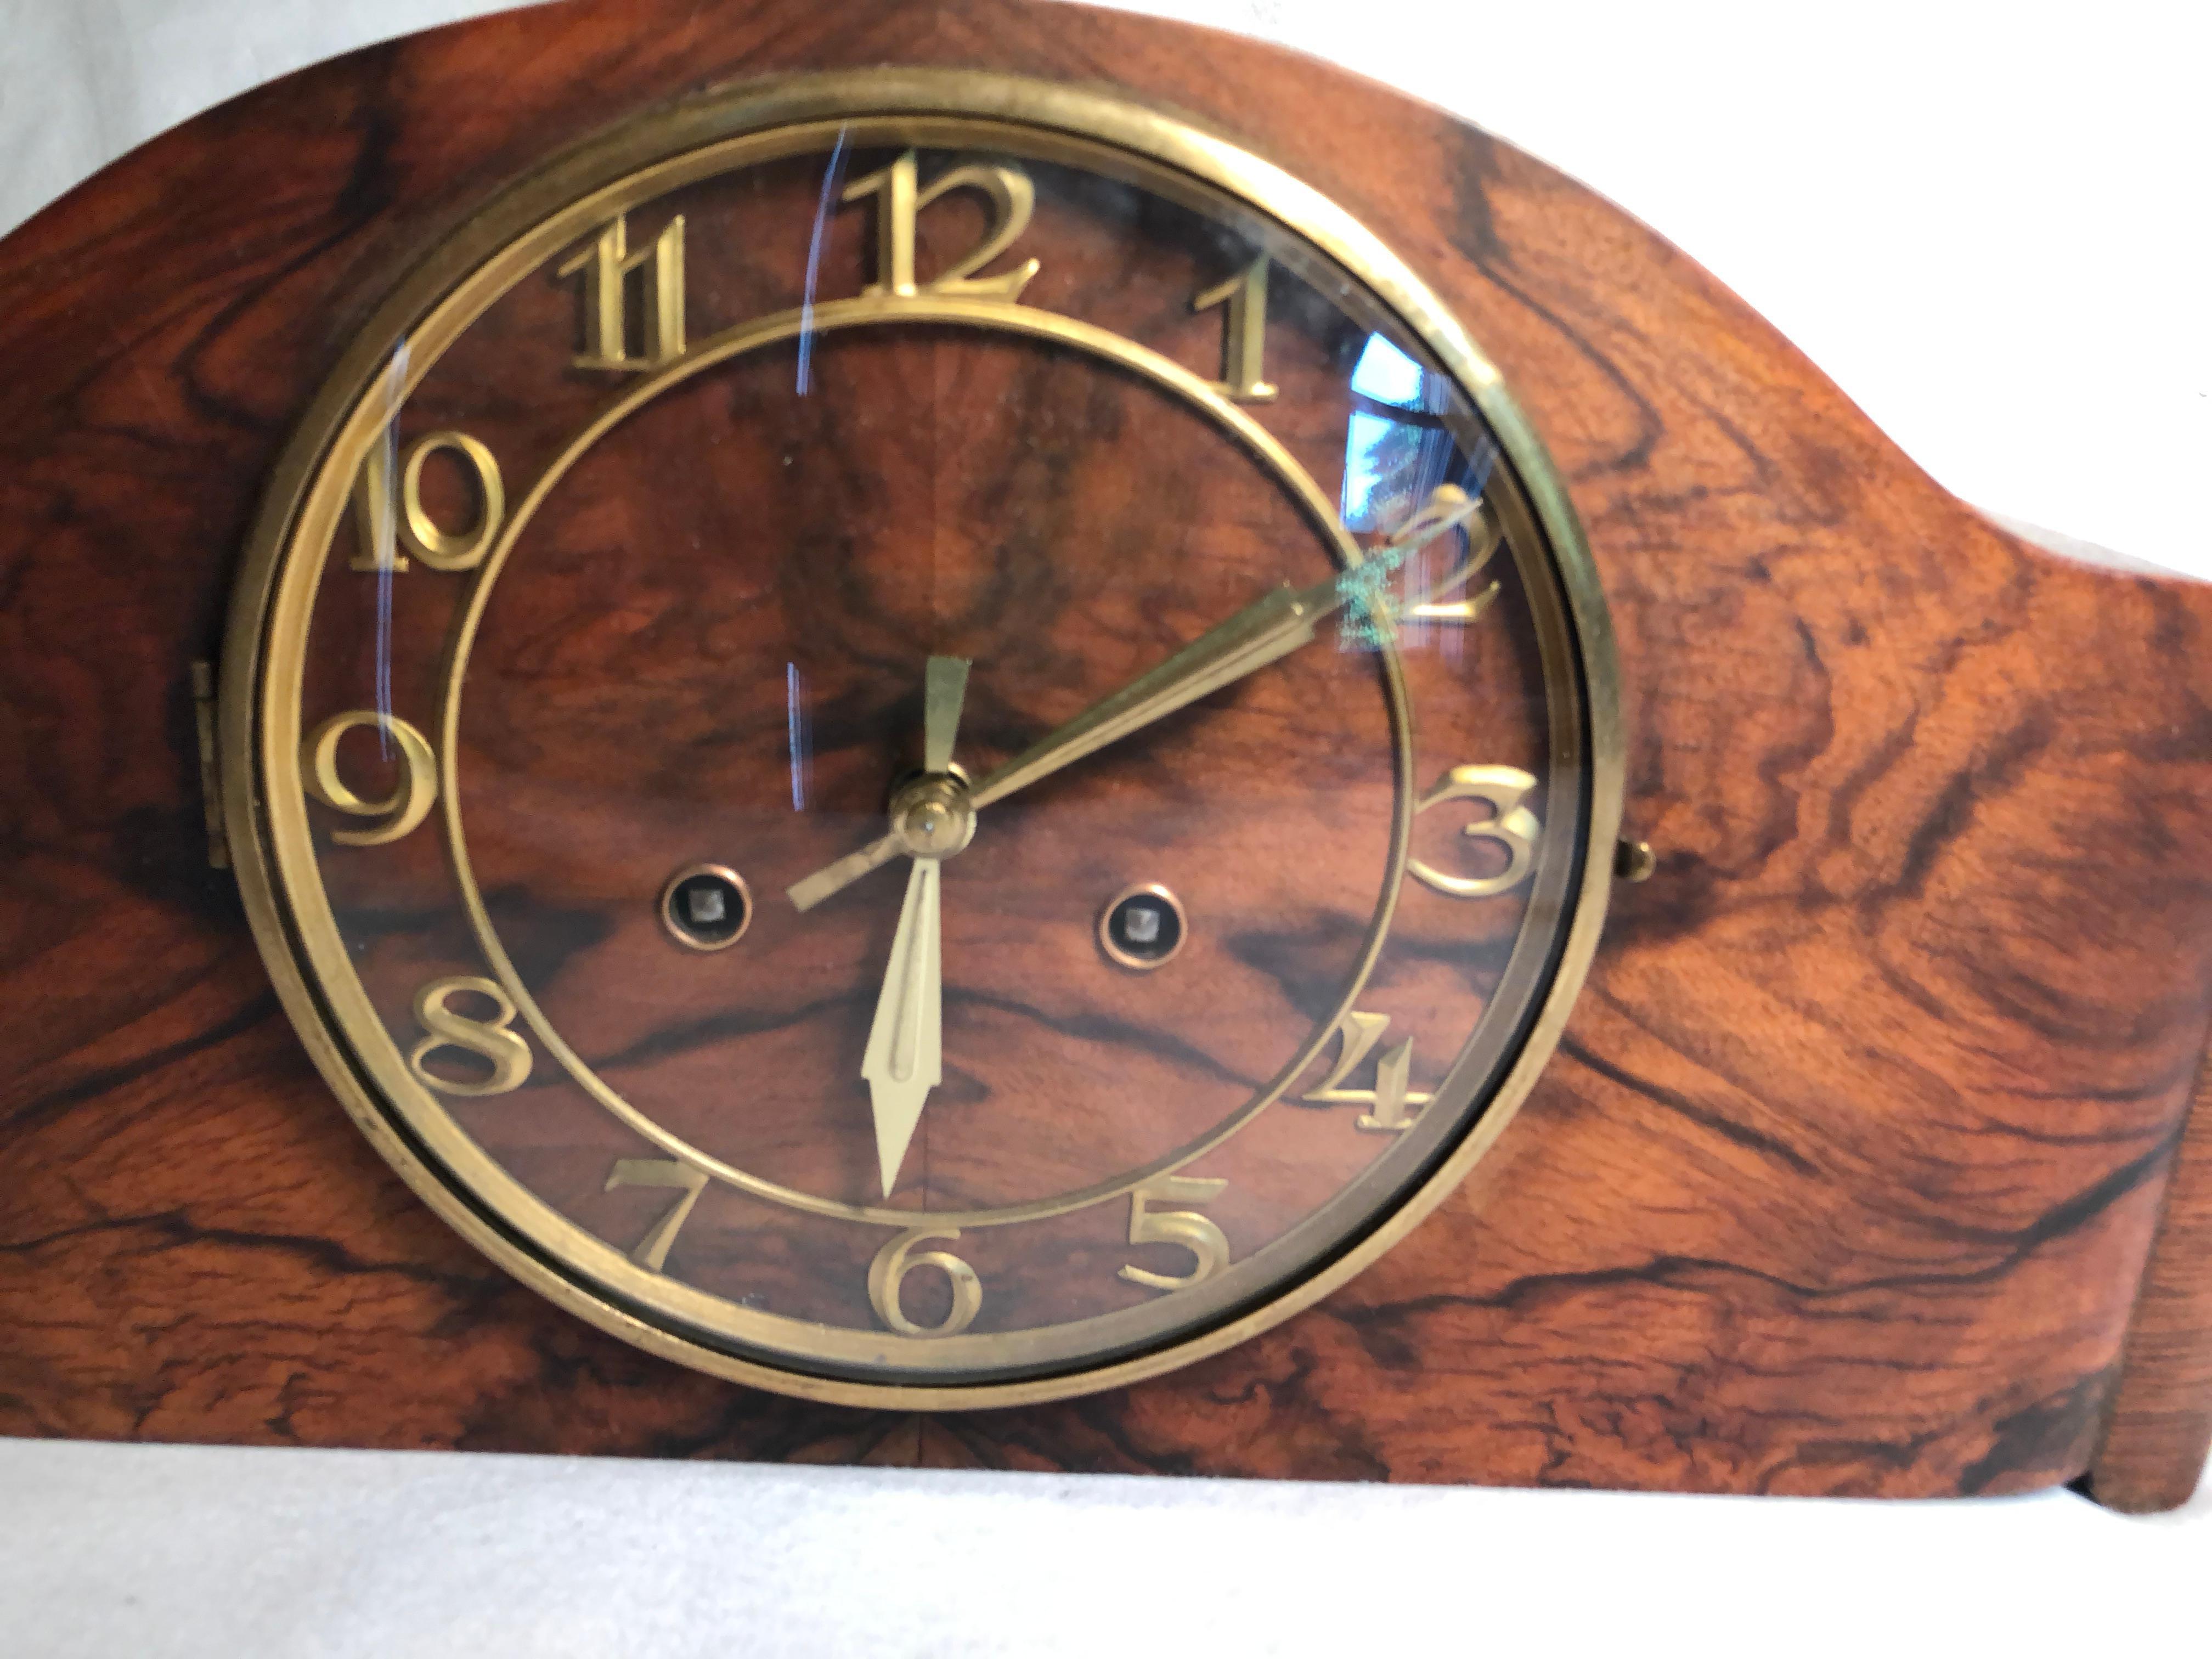 This wonderful clock has the most beautiful patterned wood veneered front. What makes this clock so special is that the wood pattern is only interrupted with 12 numbers and two hands. It has been cleaned and inspected by a certified horologist and